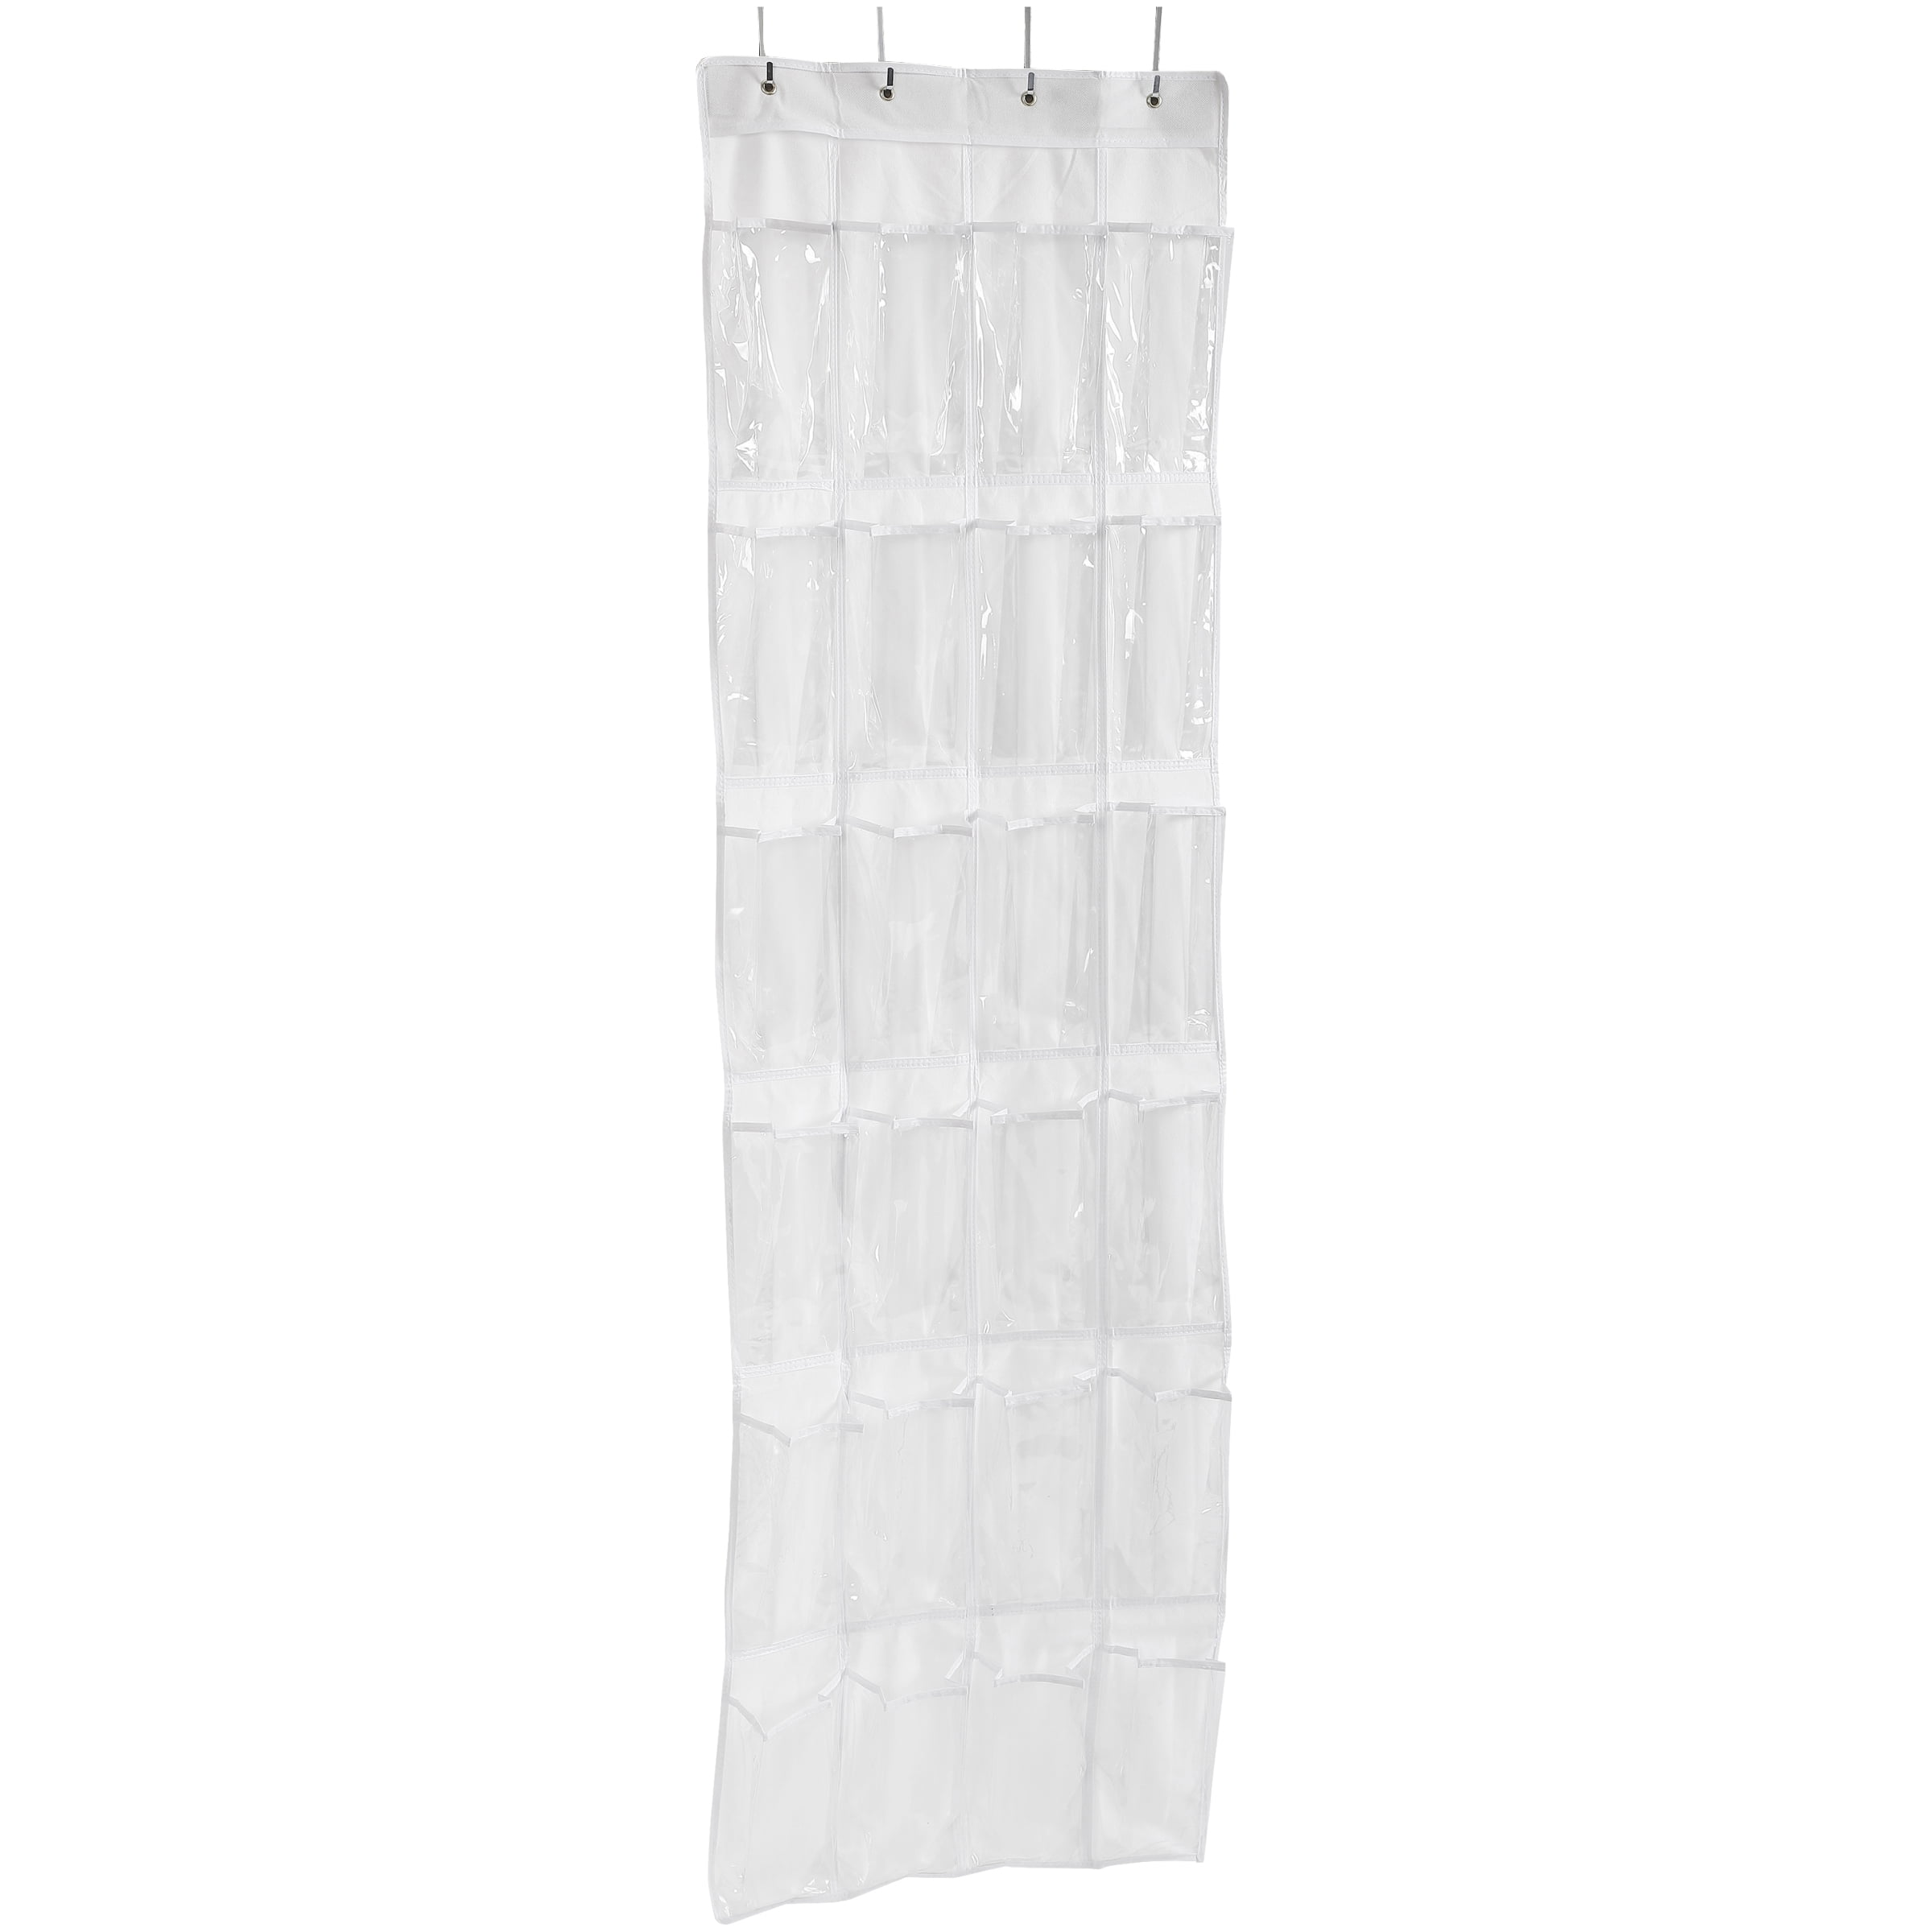 Mainstays Nonwoven 24 Pocket Over-The-Door Shoe Organizer Soft Silver B15 